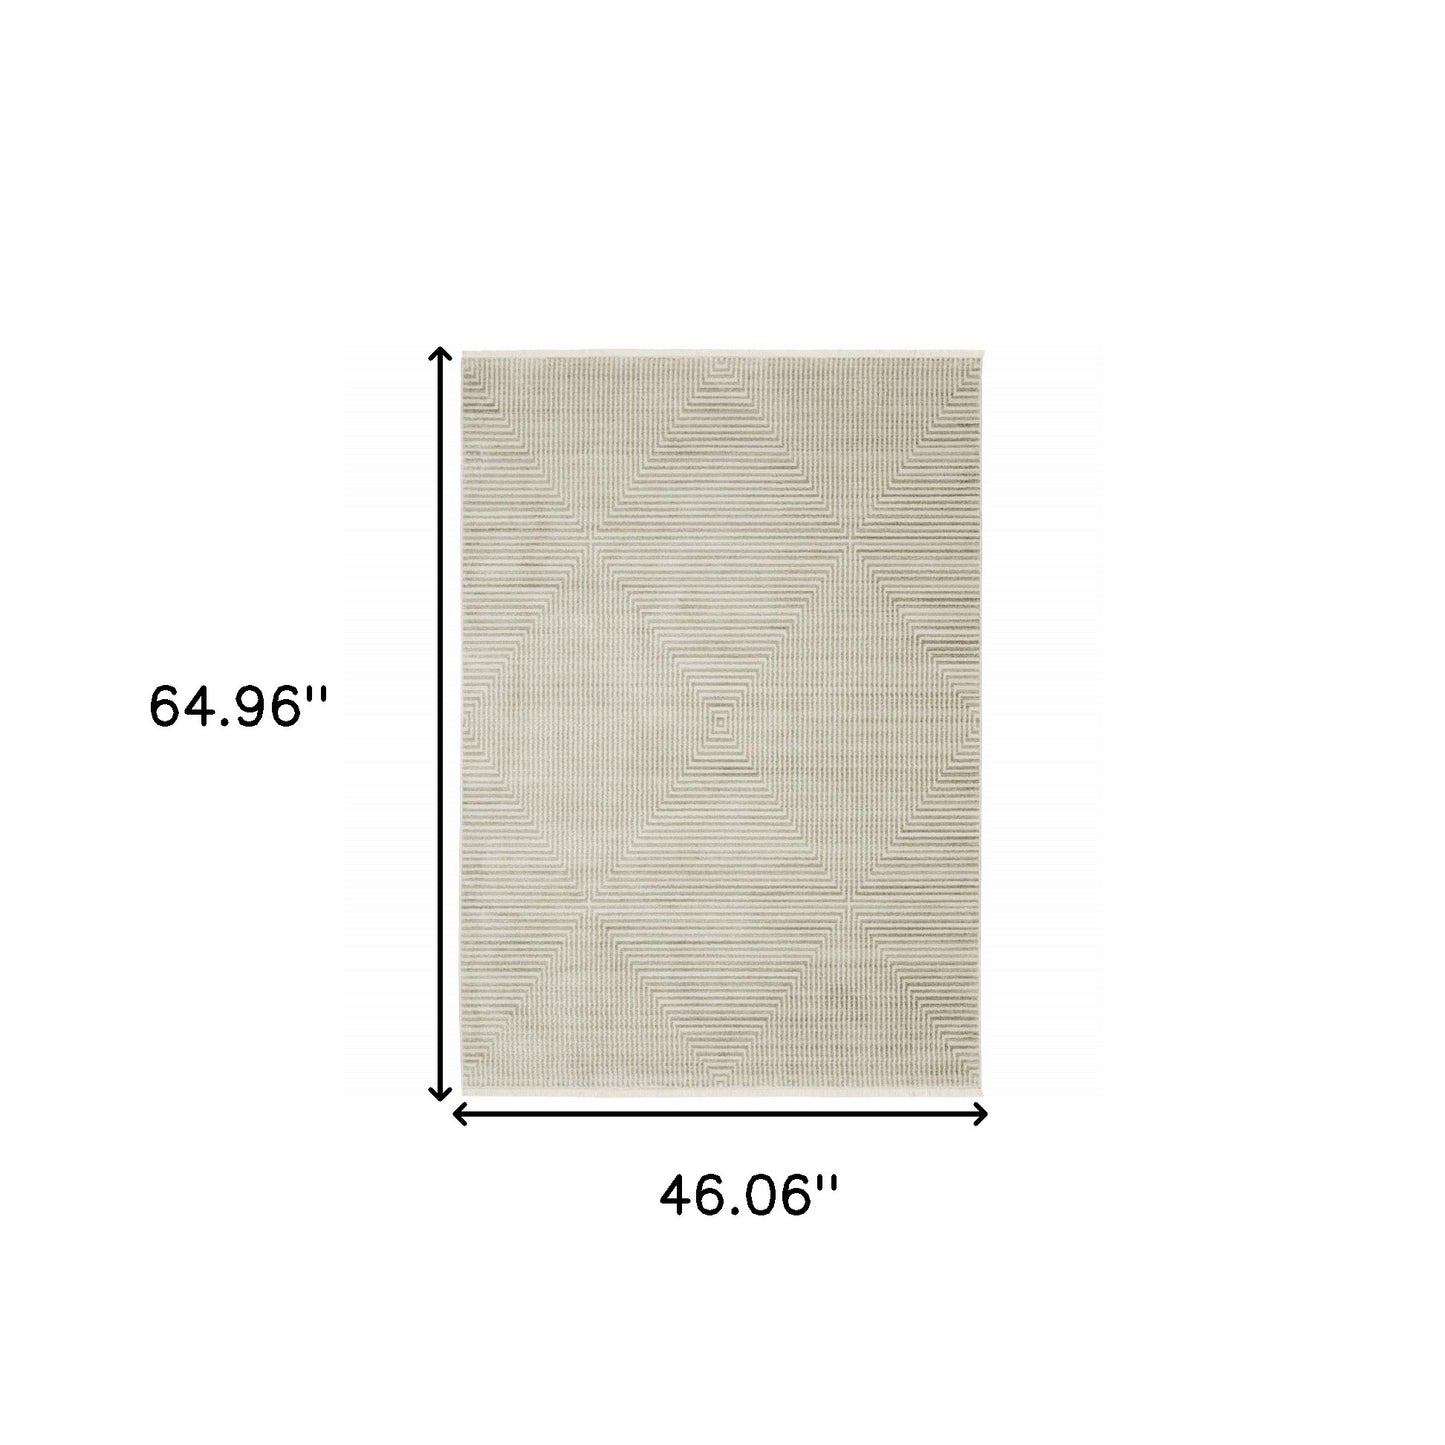 4' X 6' Ivory Beige Taupe And Tan Geometric Power Loom Stain Resistant Area Rug With Fringe